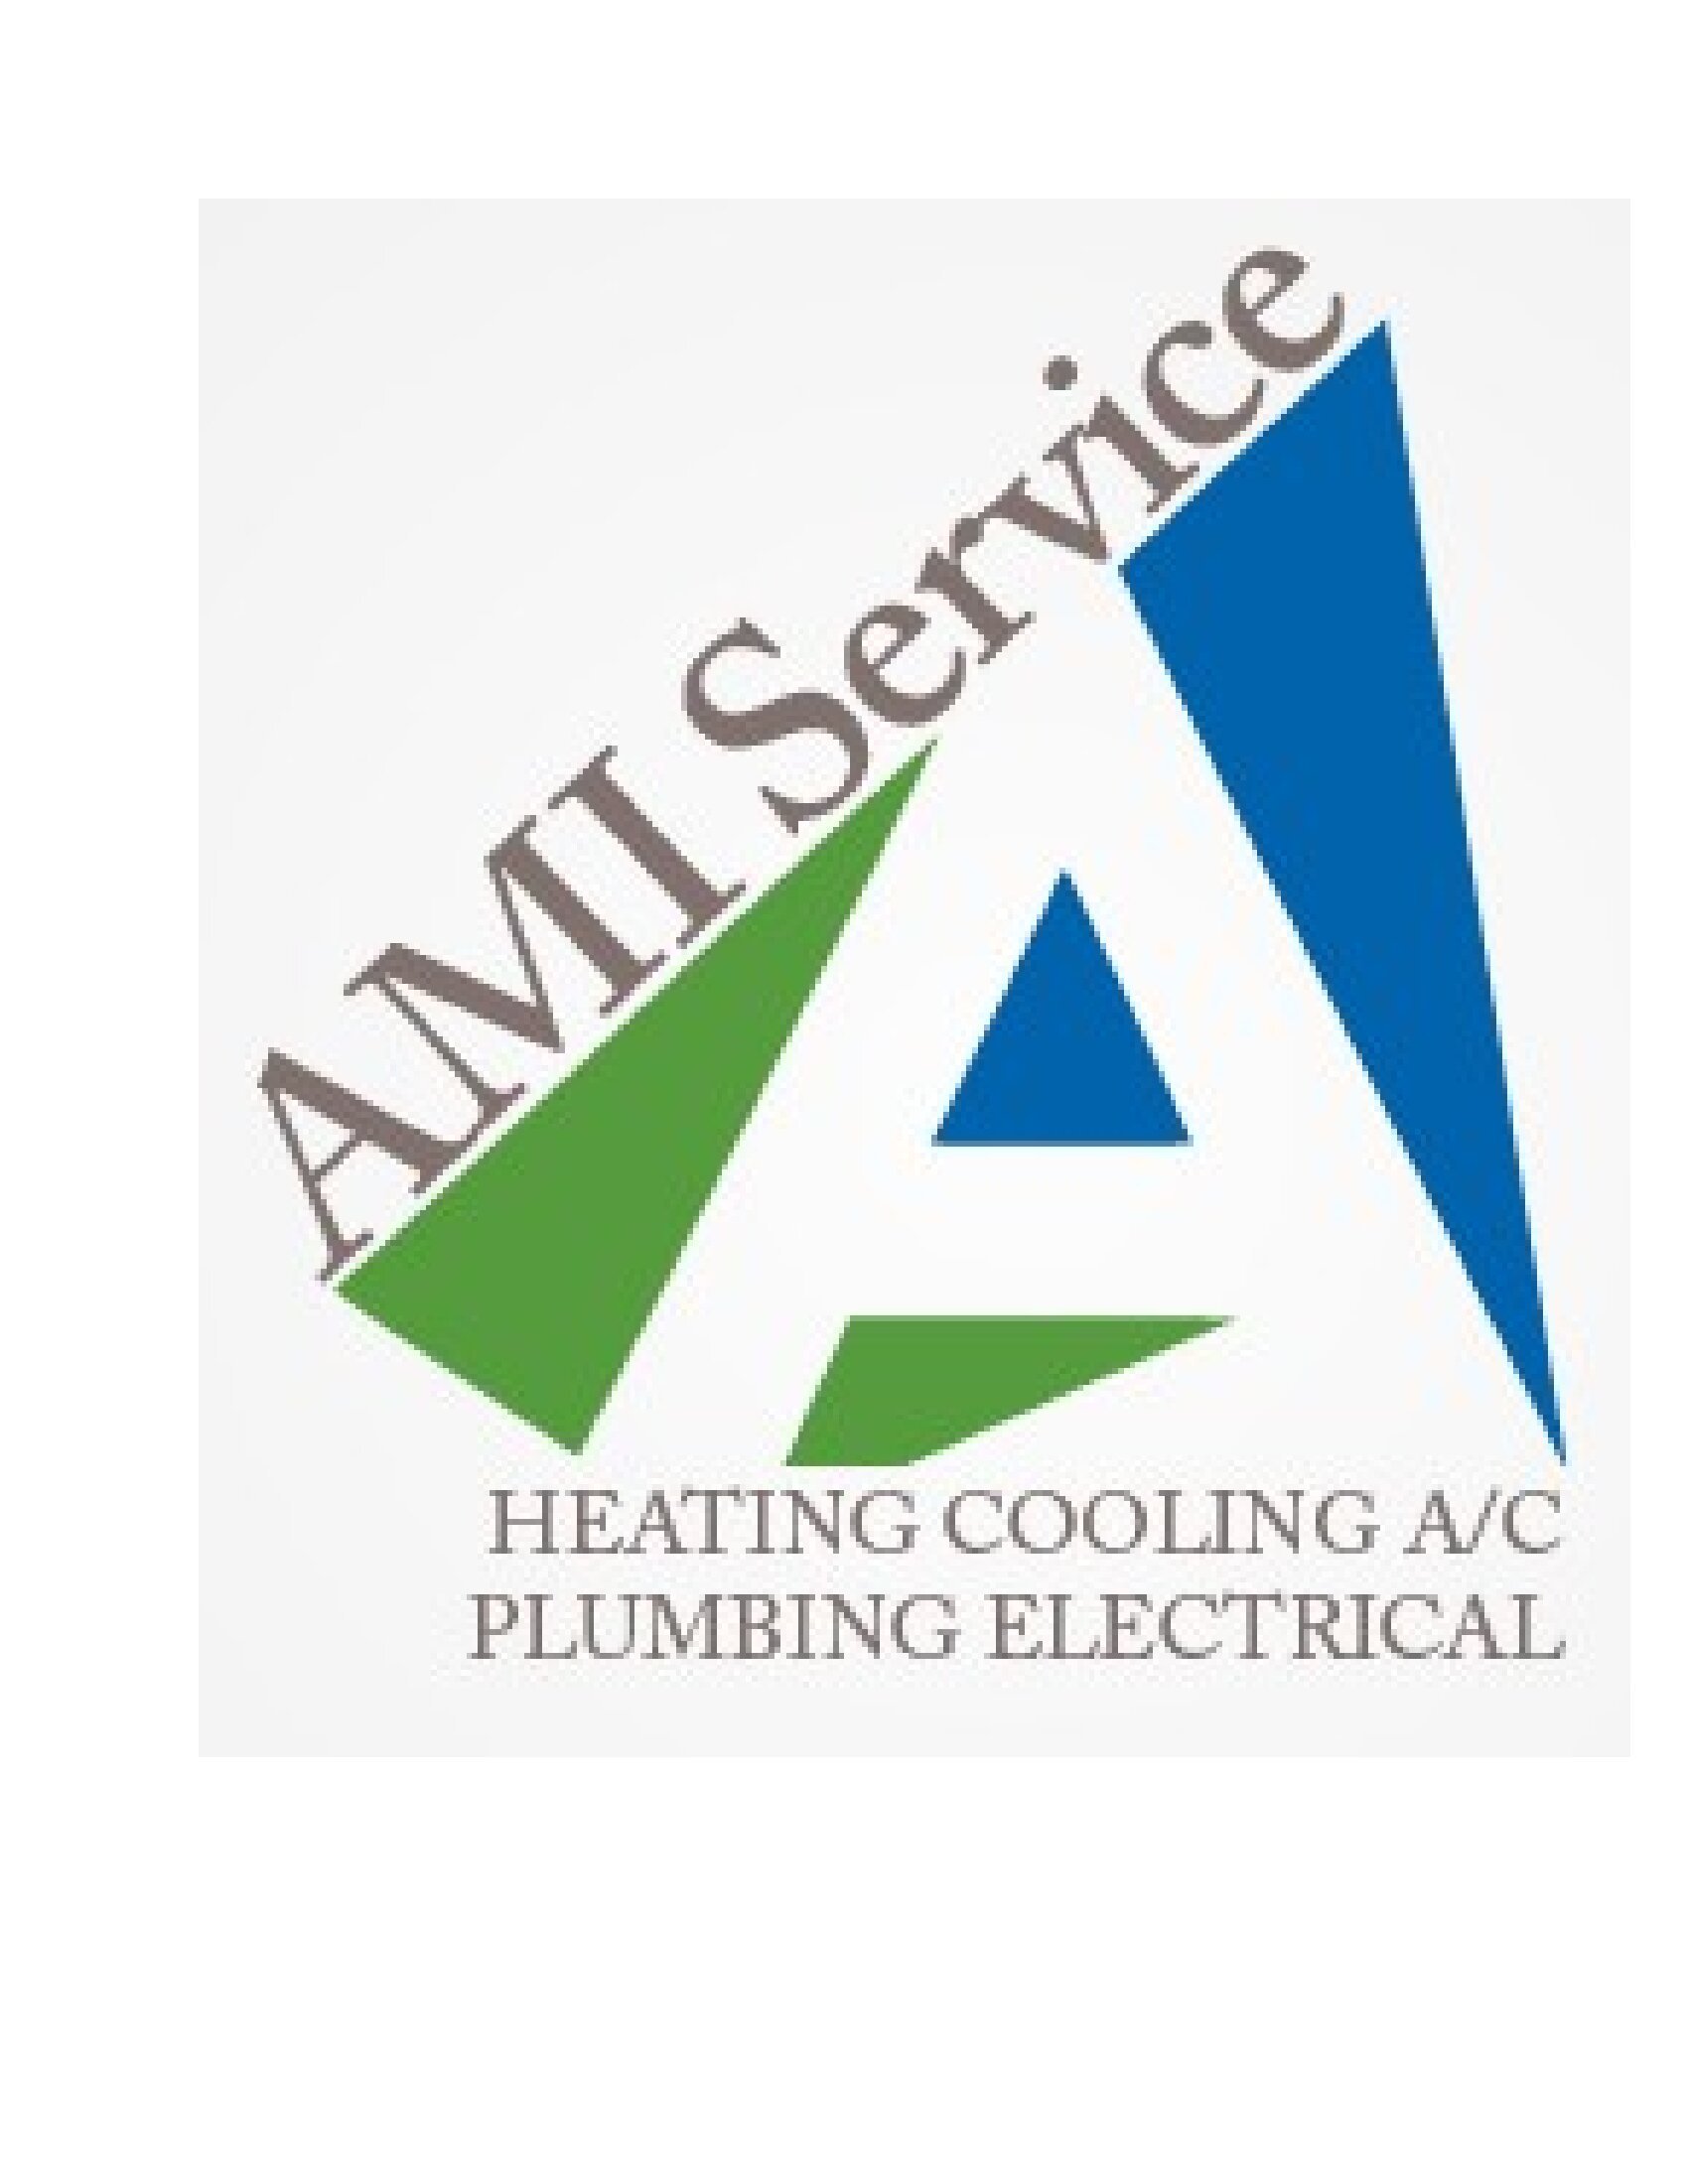 AMI Service and Repair provides Albuquerque and surrounding area with outstanding plumbing, heating, cooling, irrigation and backflow service and repair.